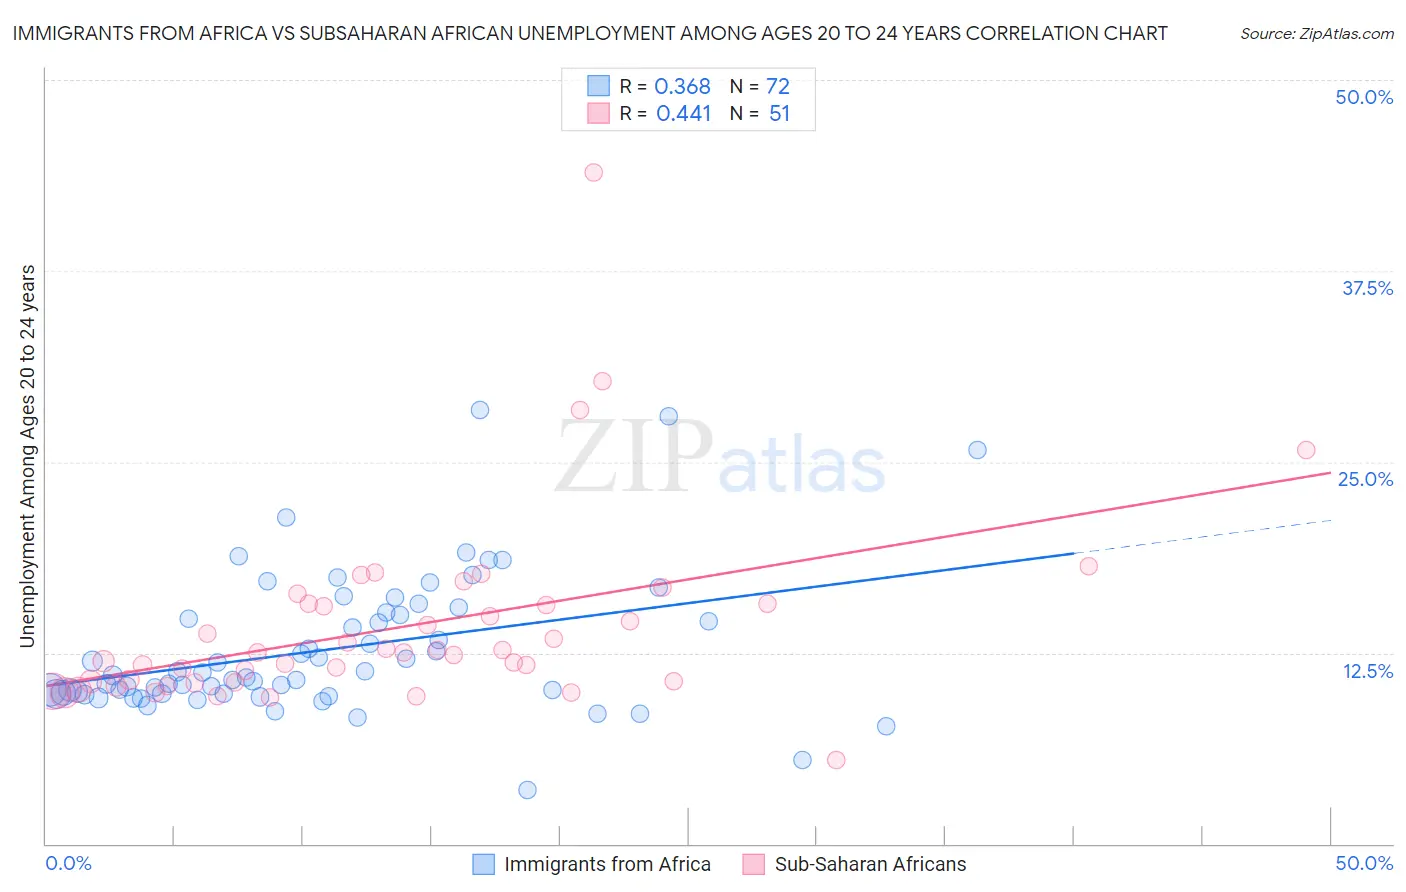 Immigrants from Africa vs Subsaharan African Unemployment Among Ages 20 to 24 years